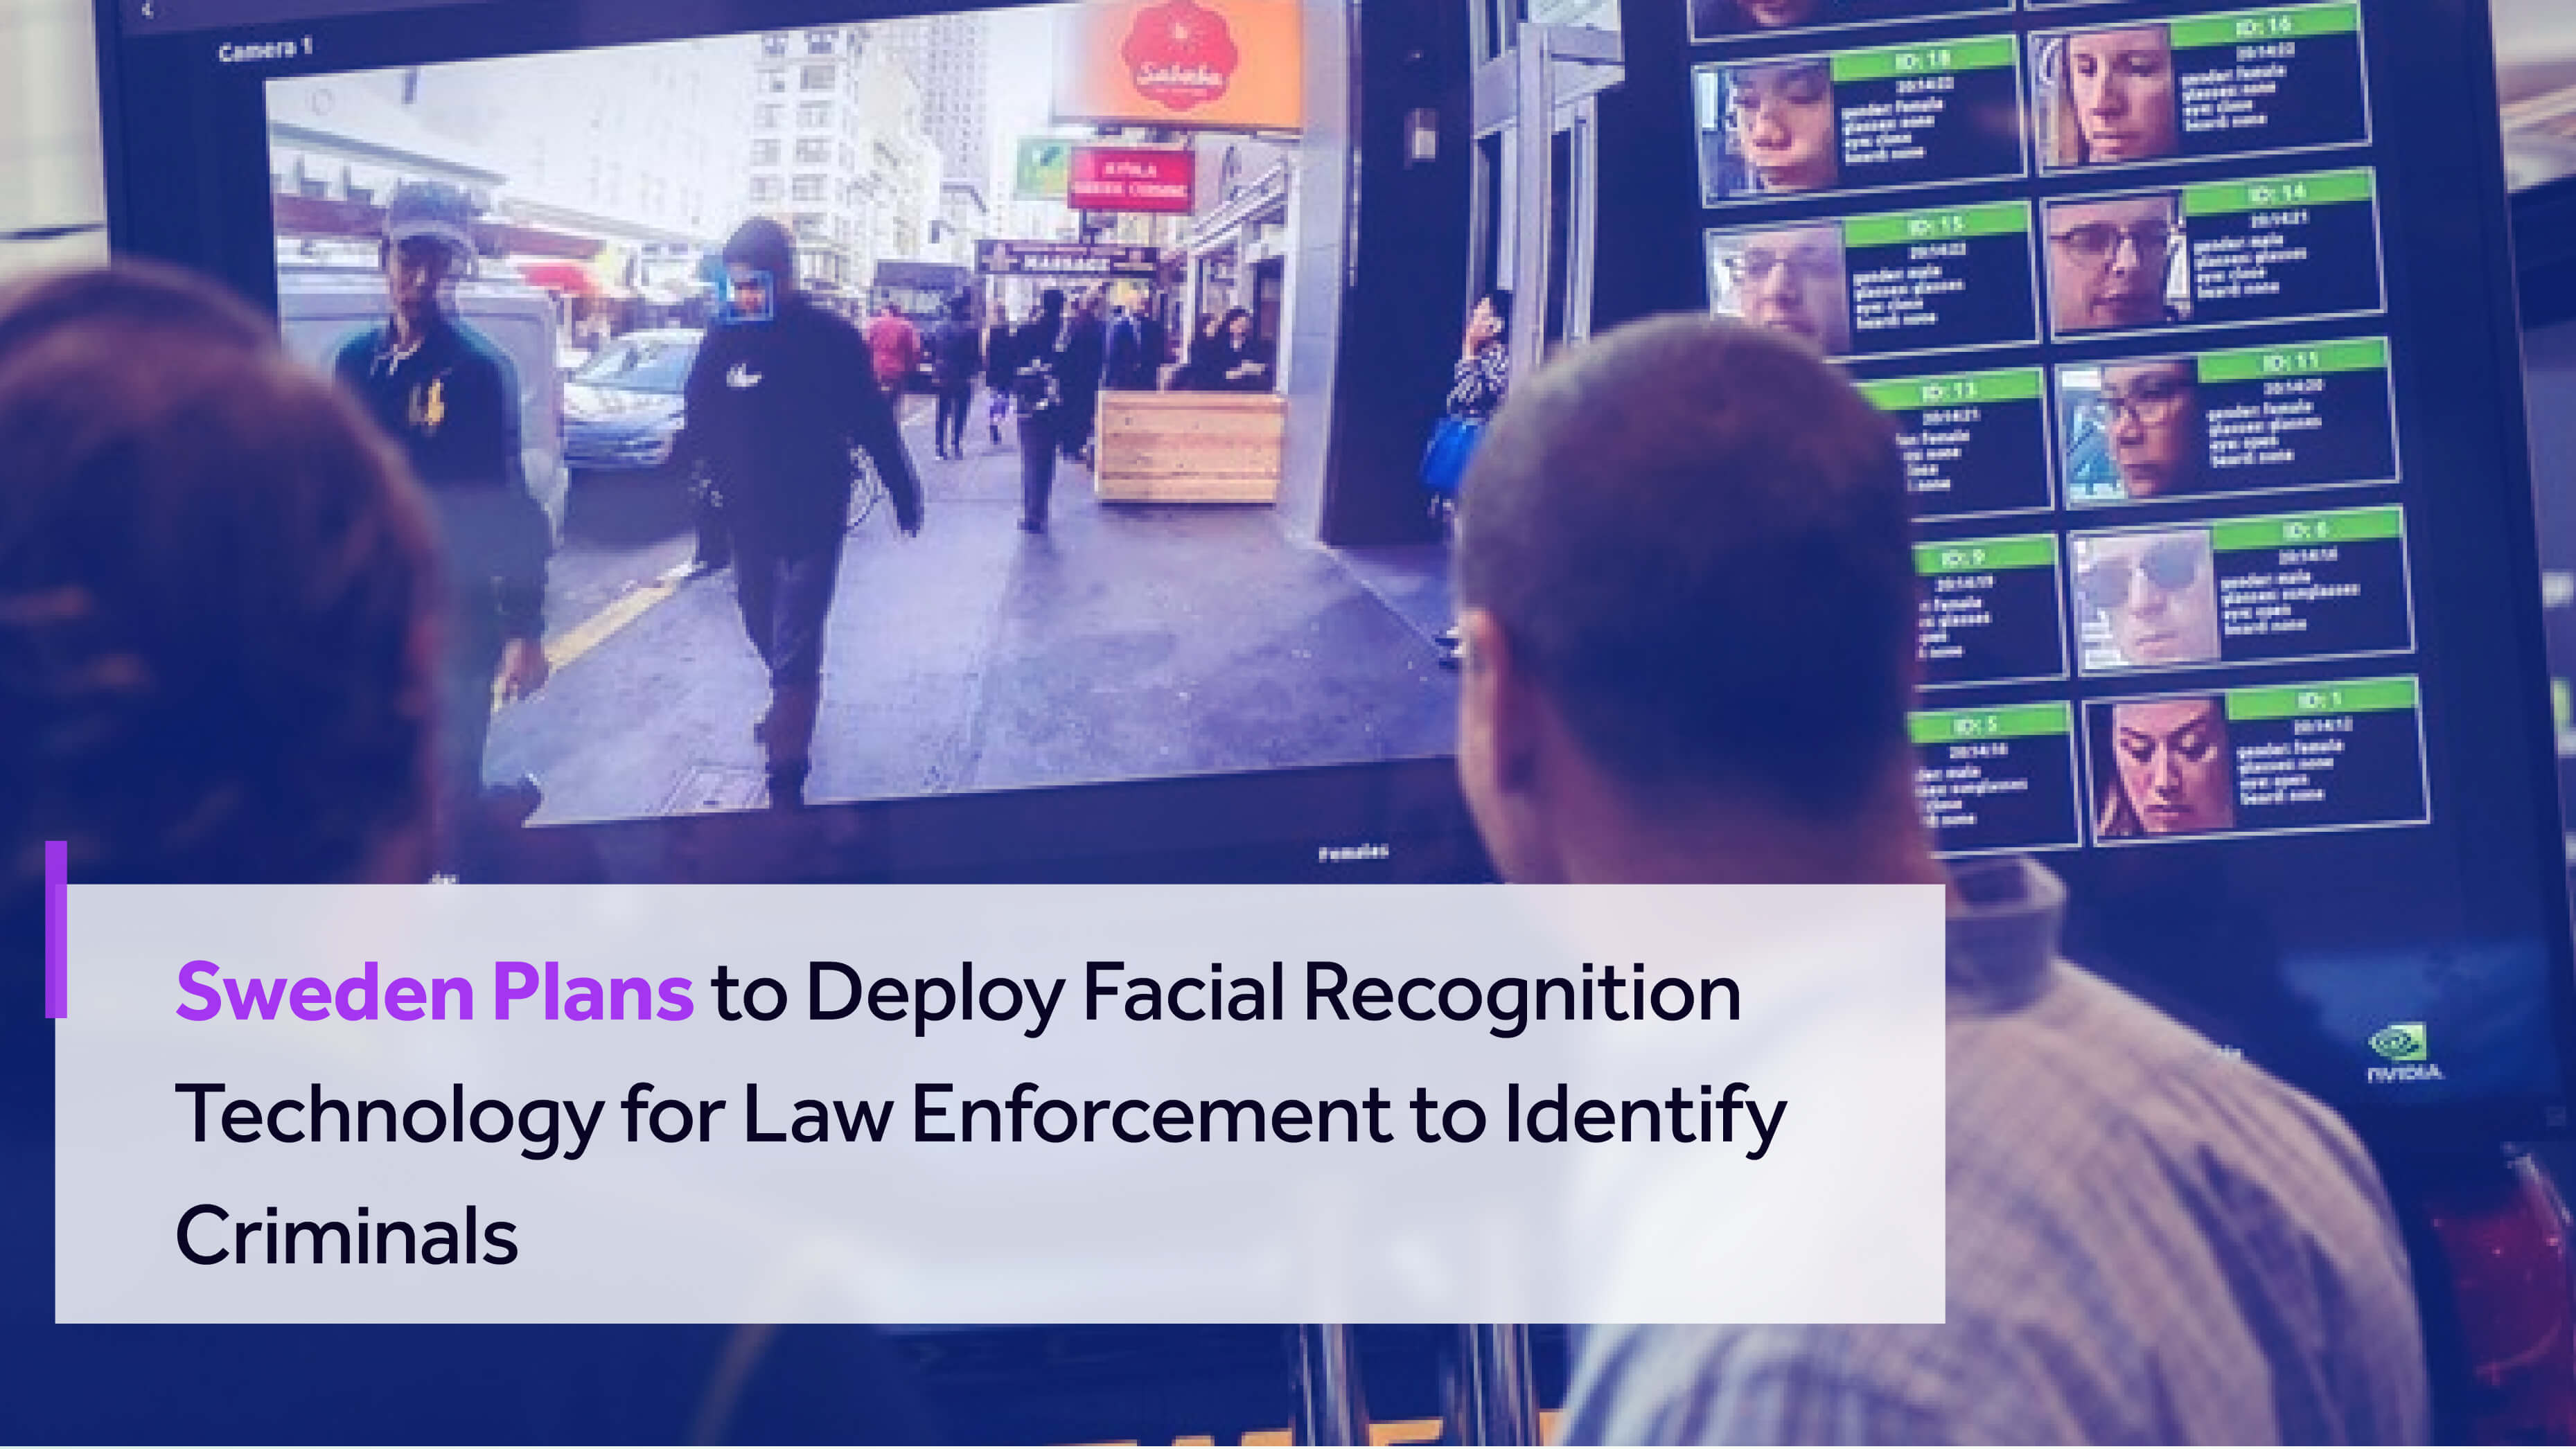 Sweden Plans to Deploy Facial Recognition Technology for Law Enforcement to Identify Criminals